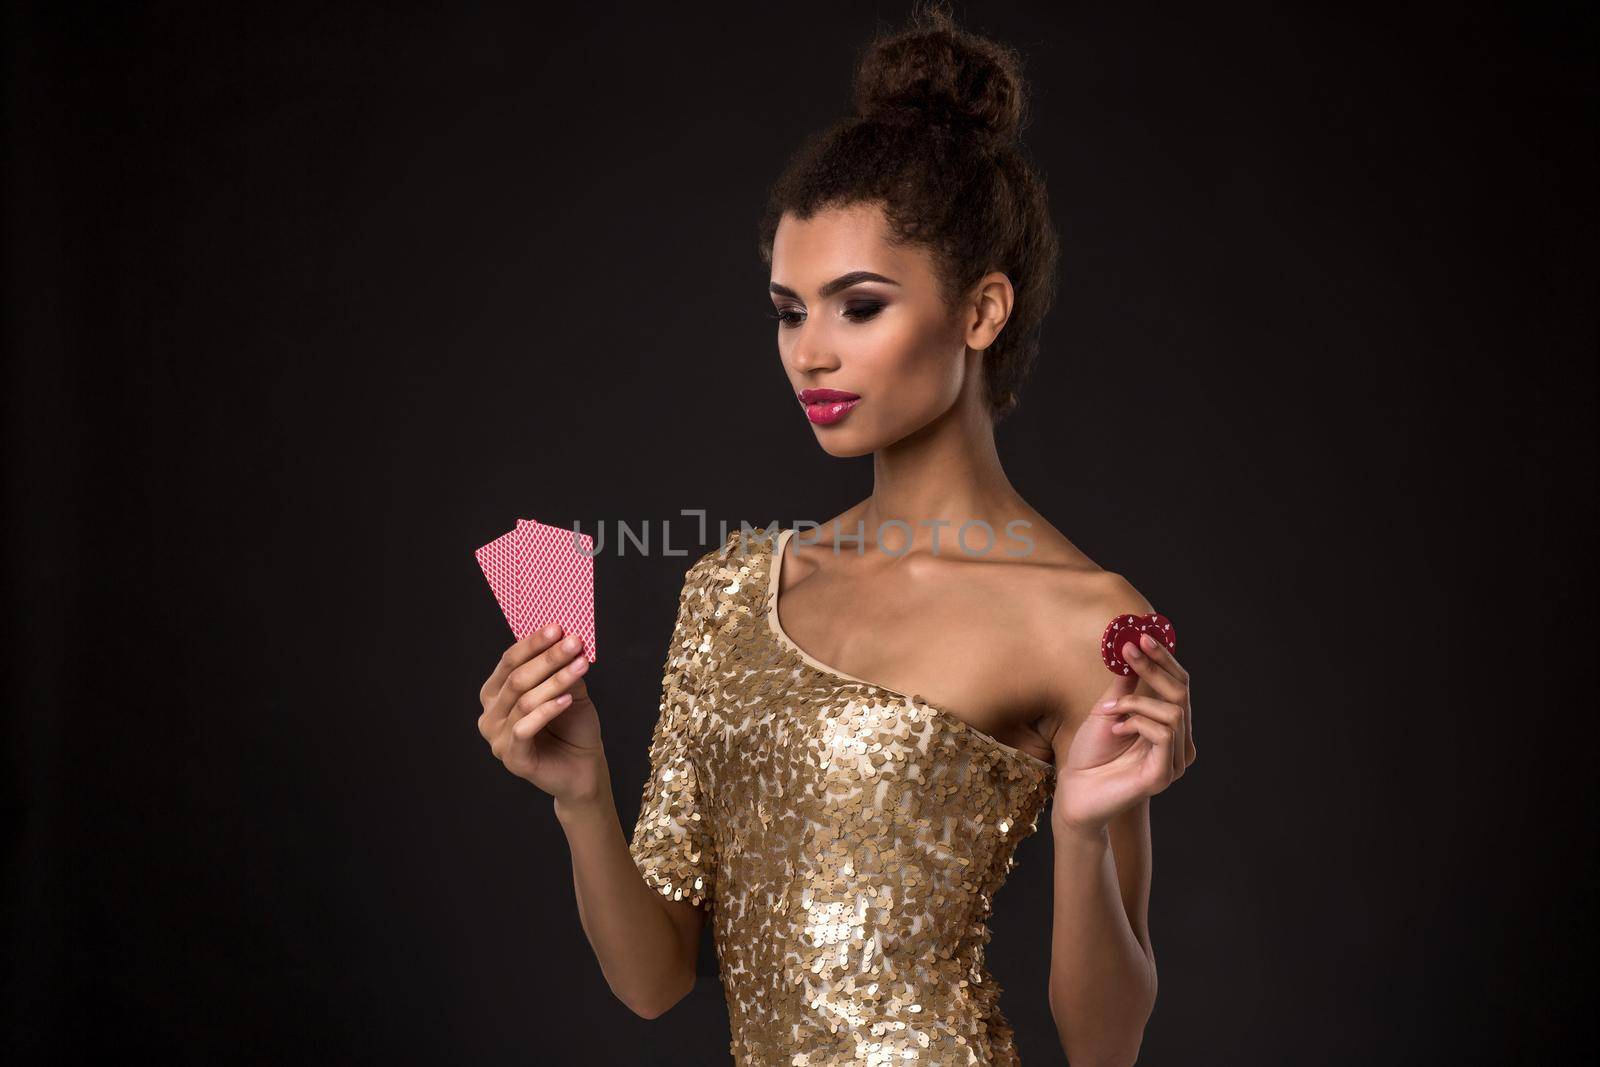 Woman winning - Young woman in a classy gold dress holding two cards and two red chips, a poker of aces card combination. by nazarovsergey